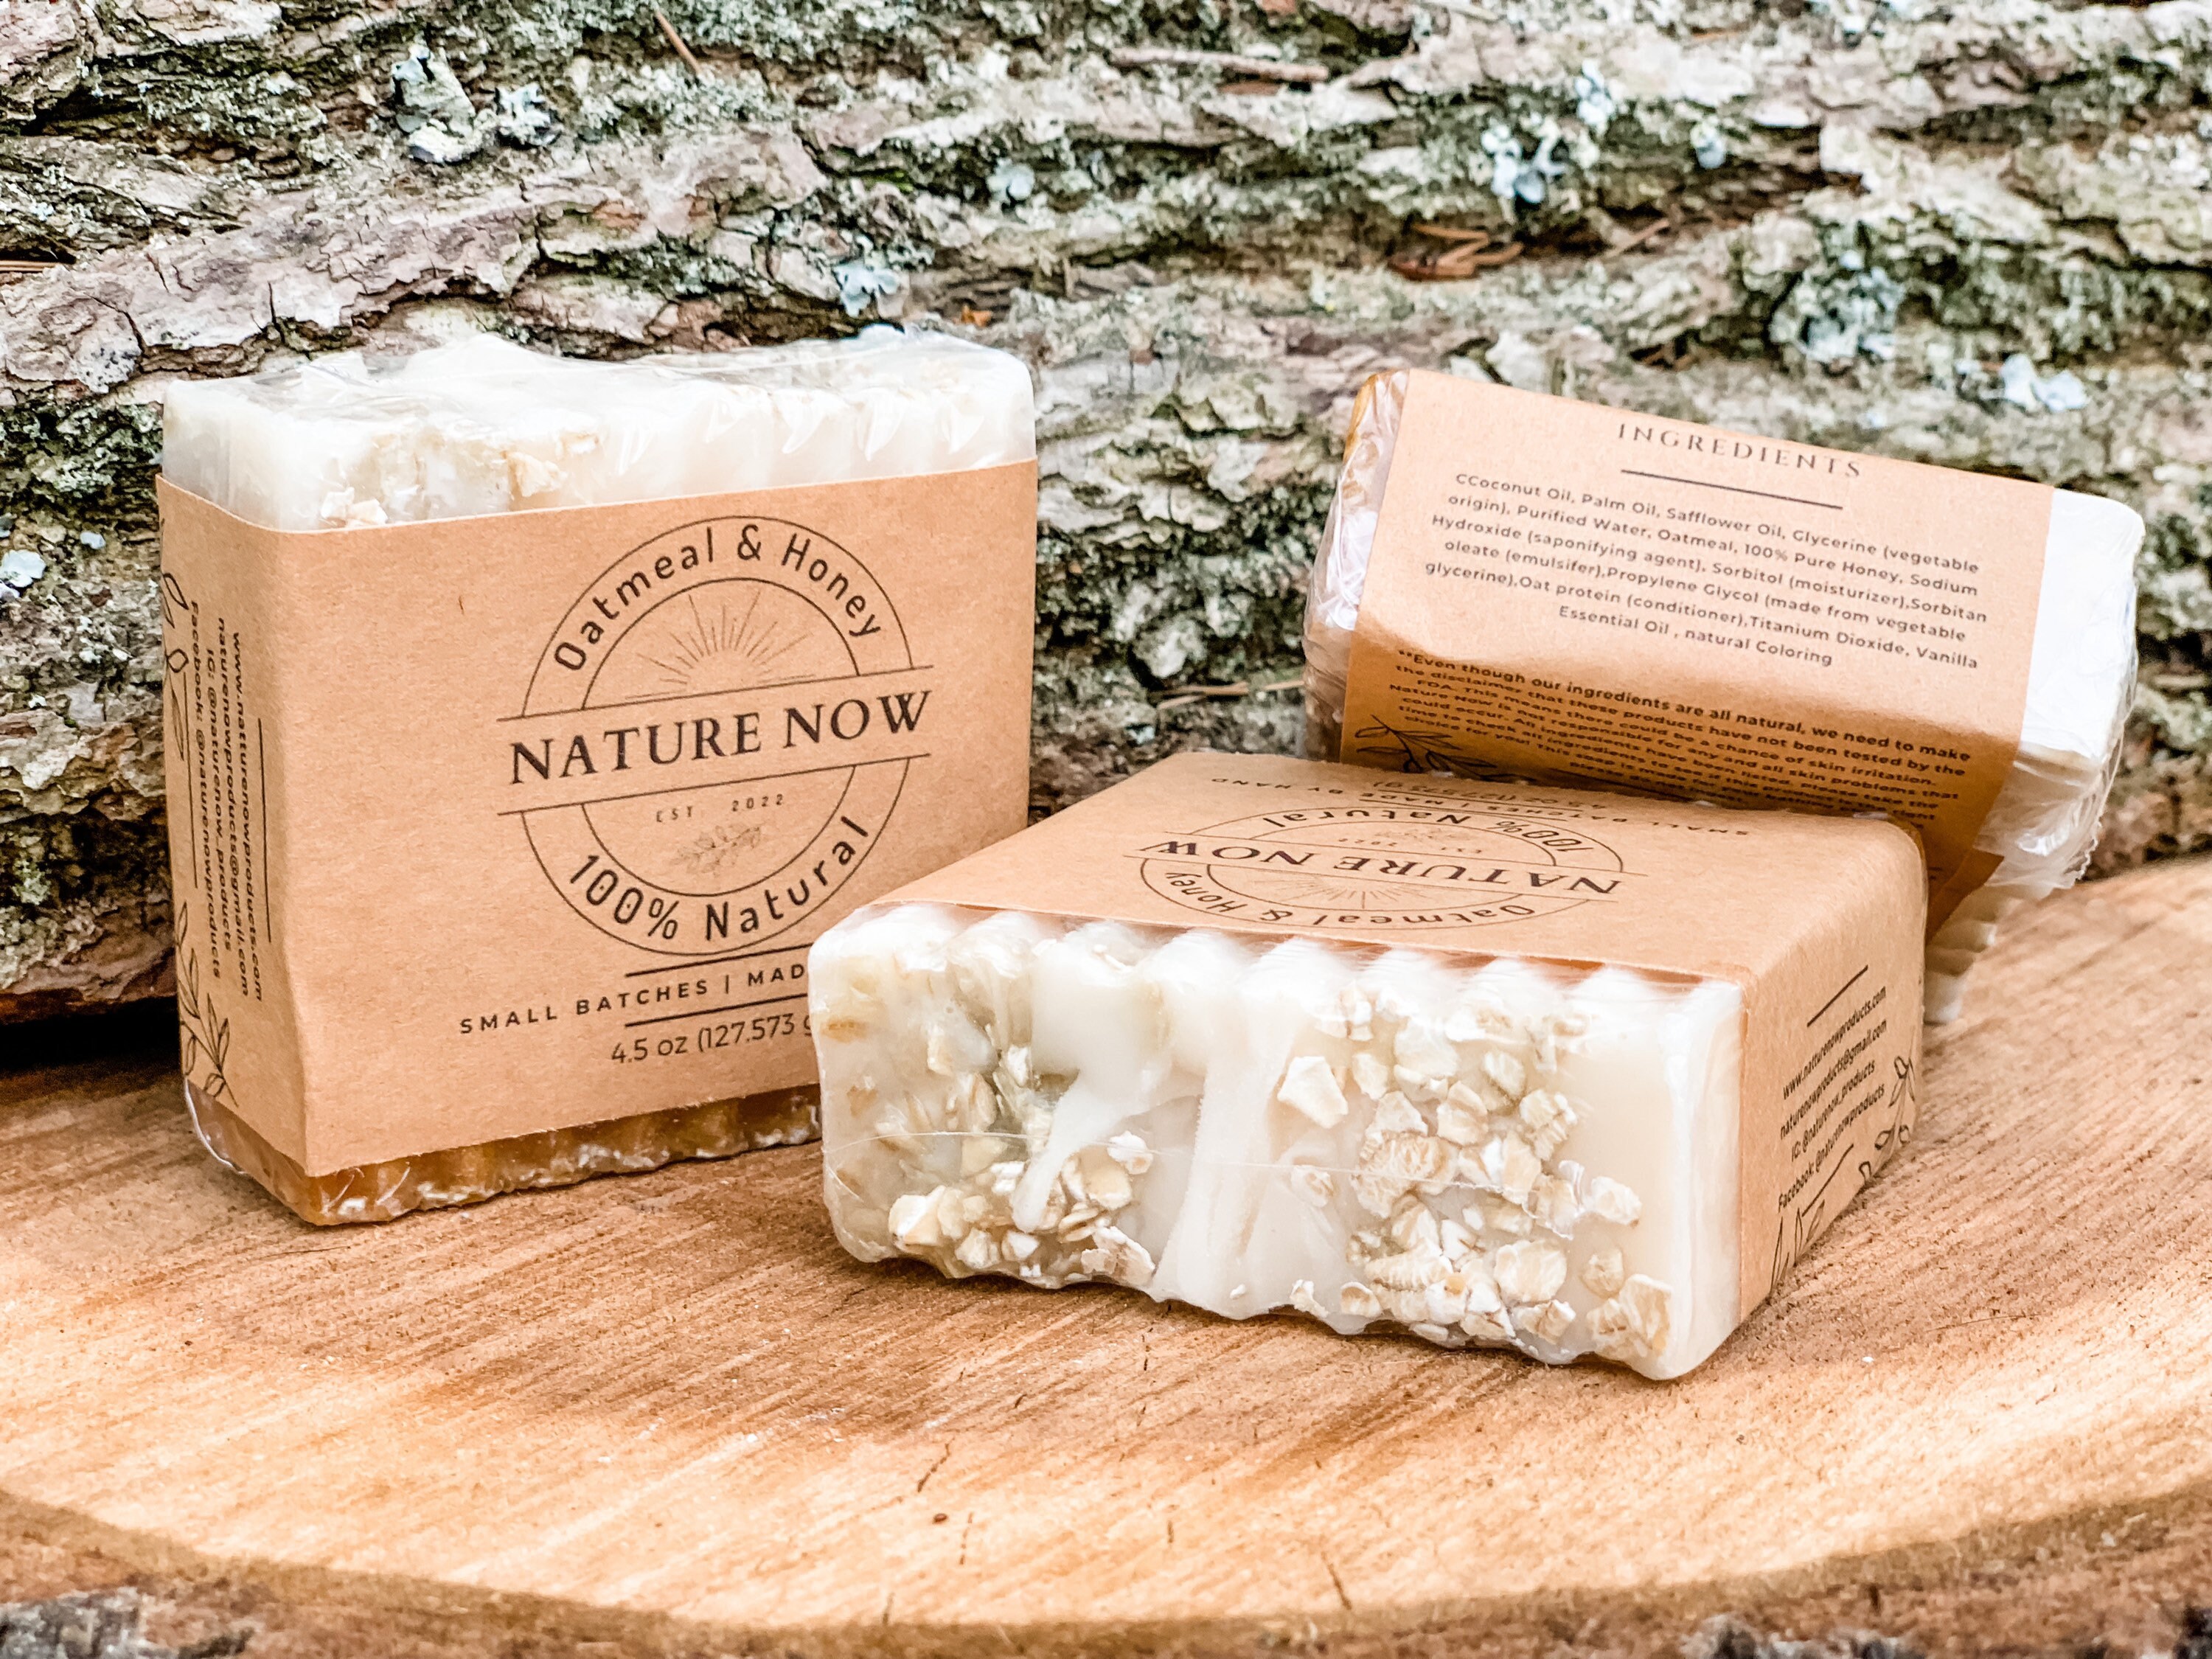 That's Natural Soap Products